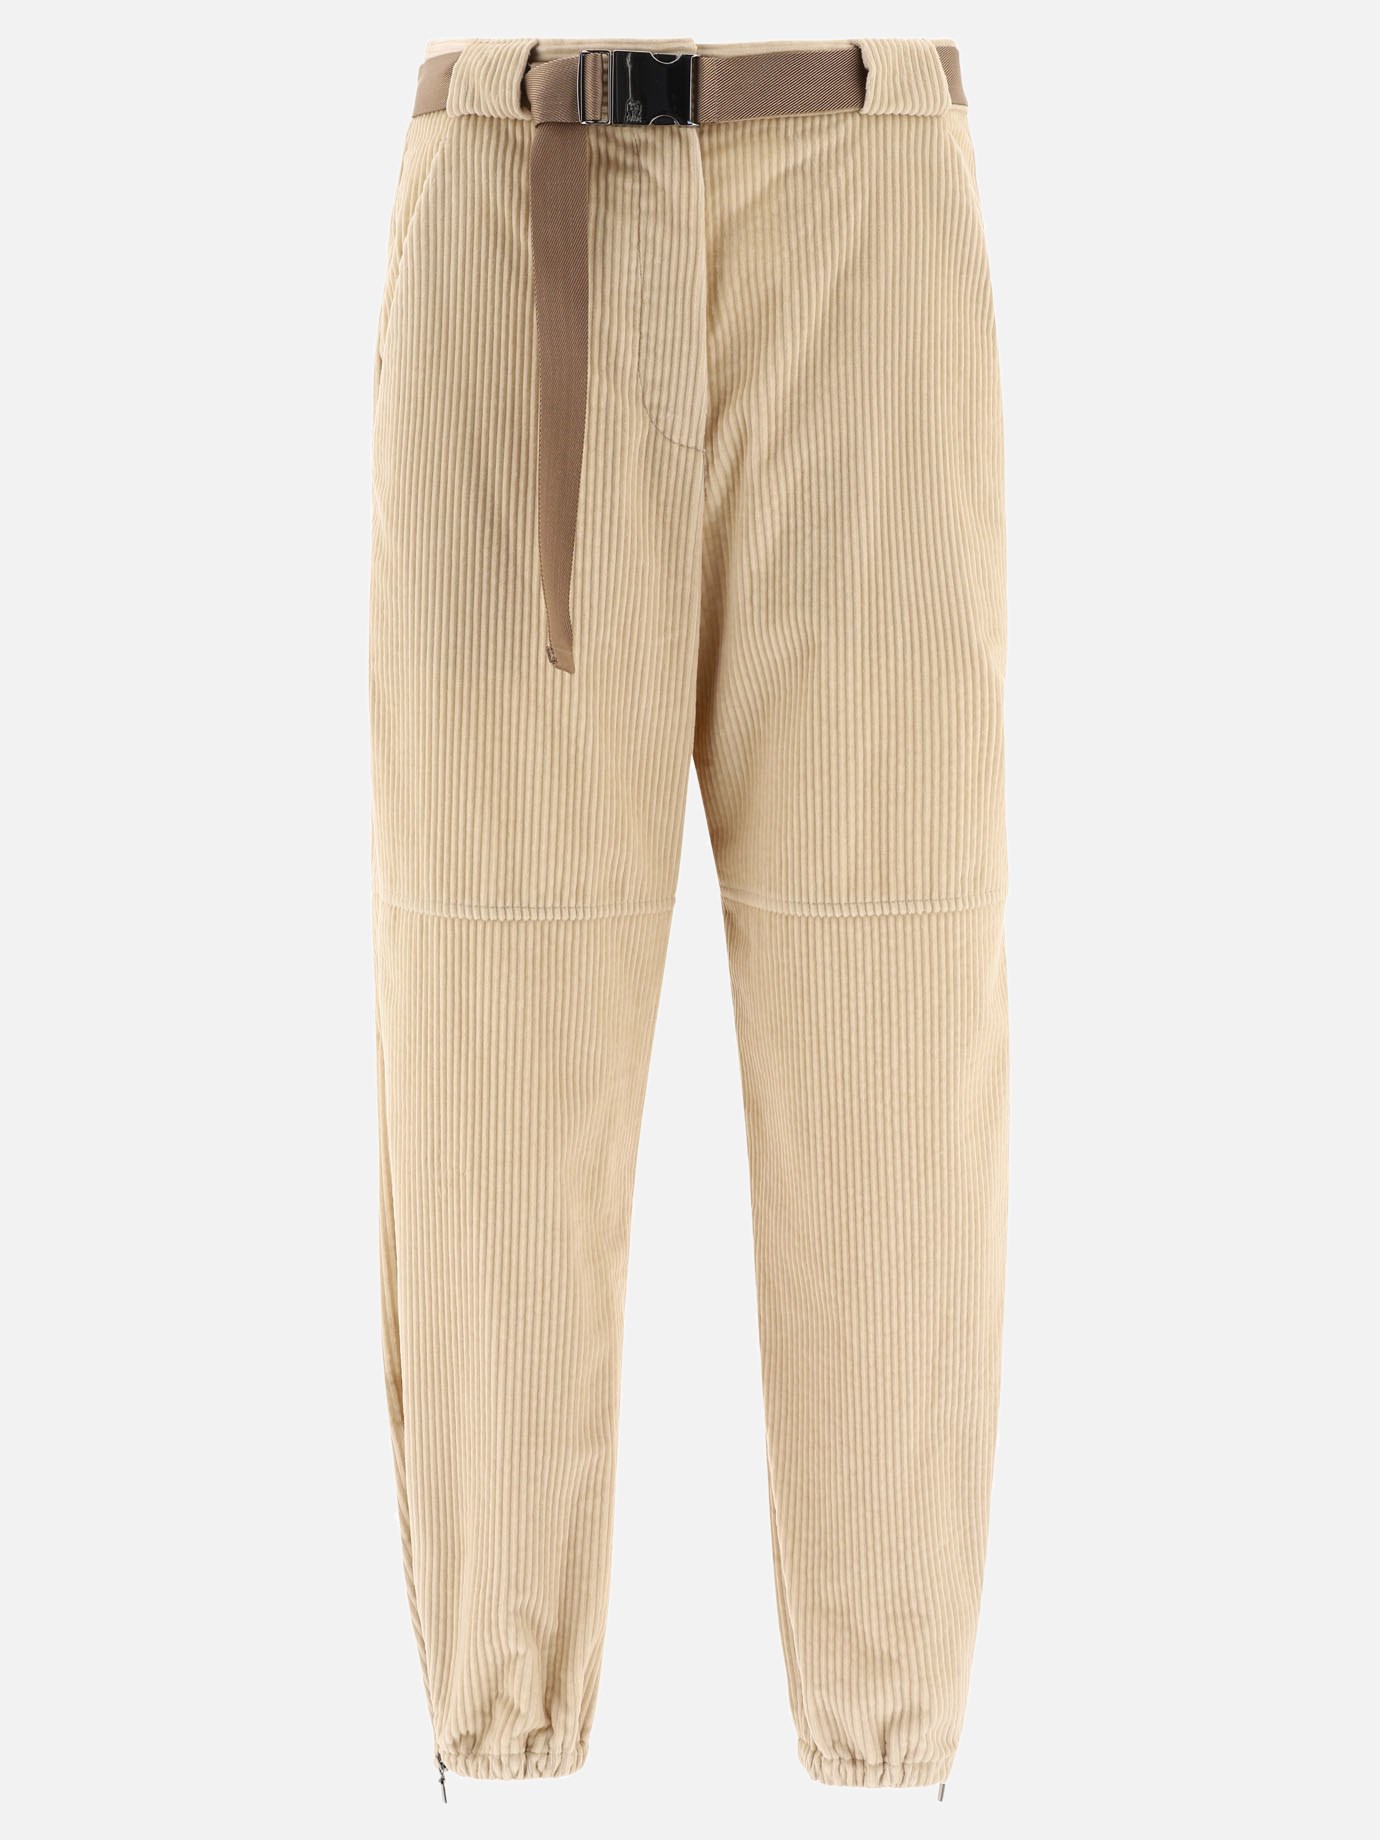 Ribbed trousers with belt